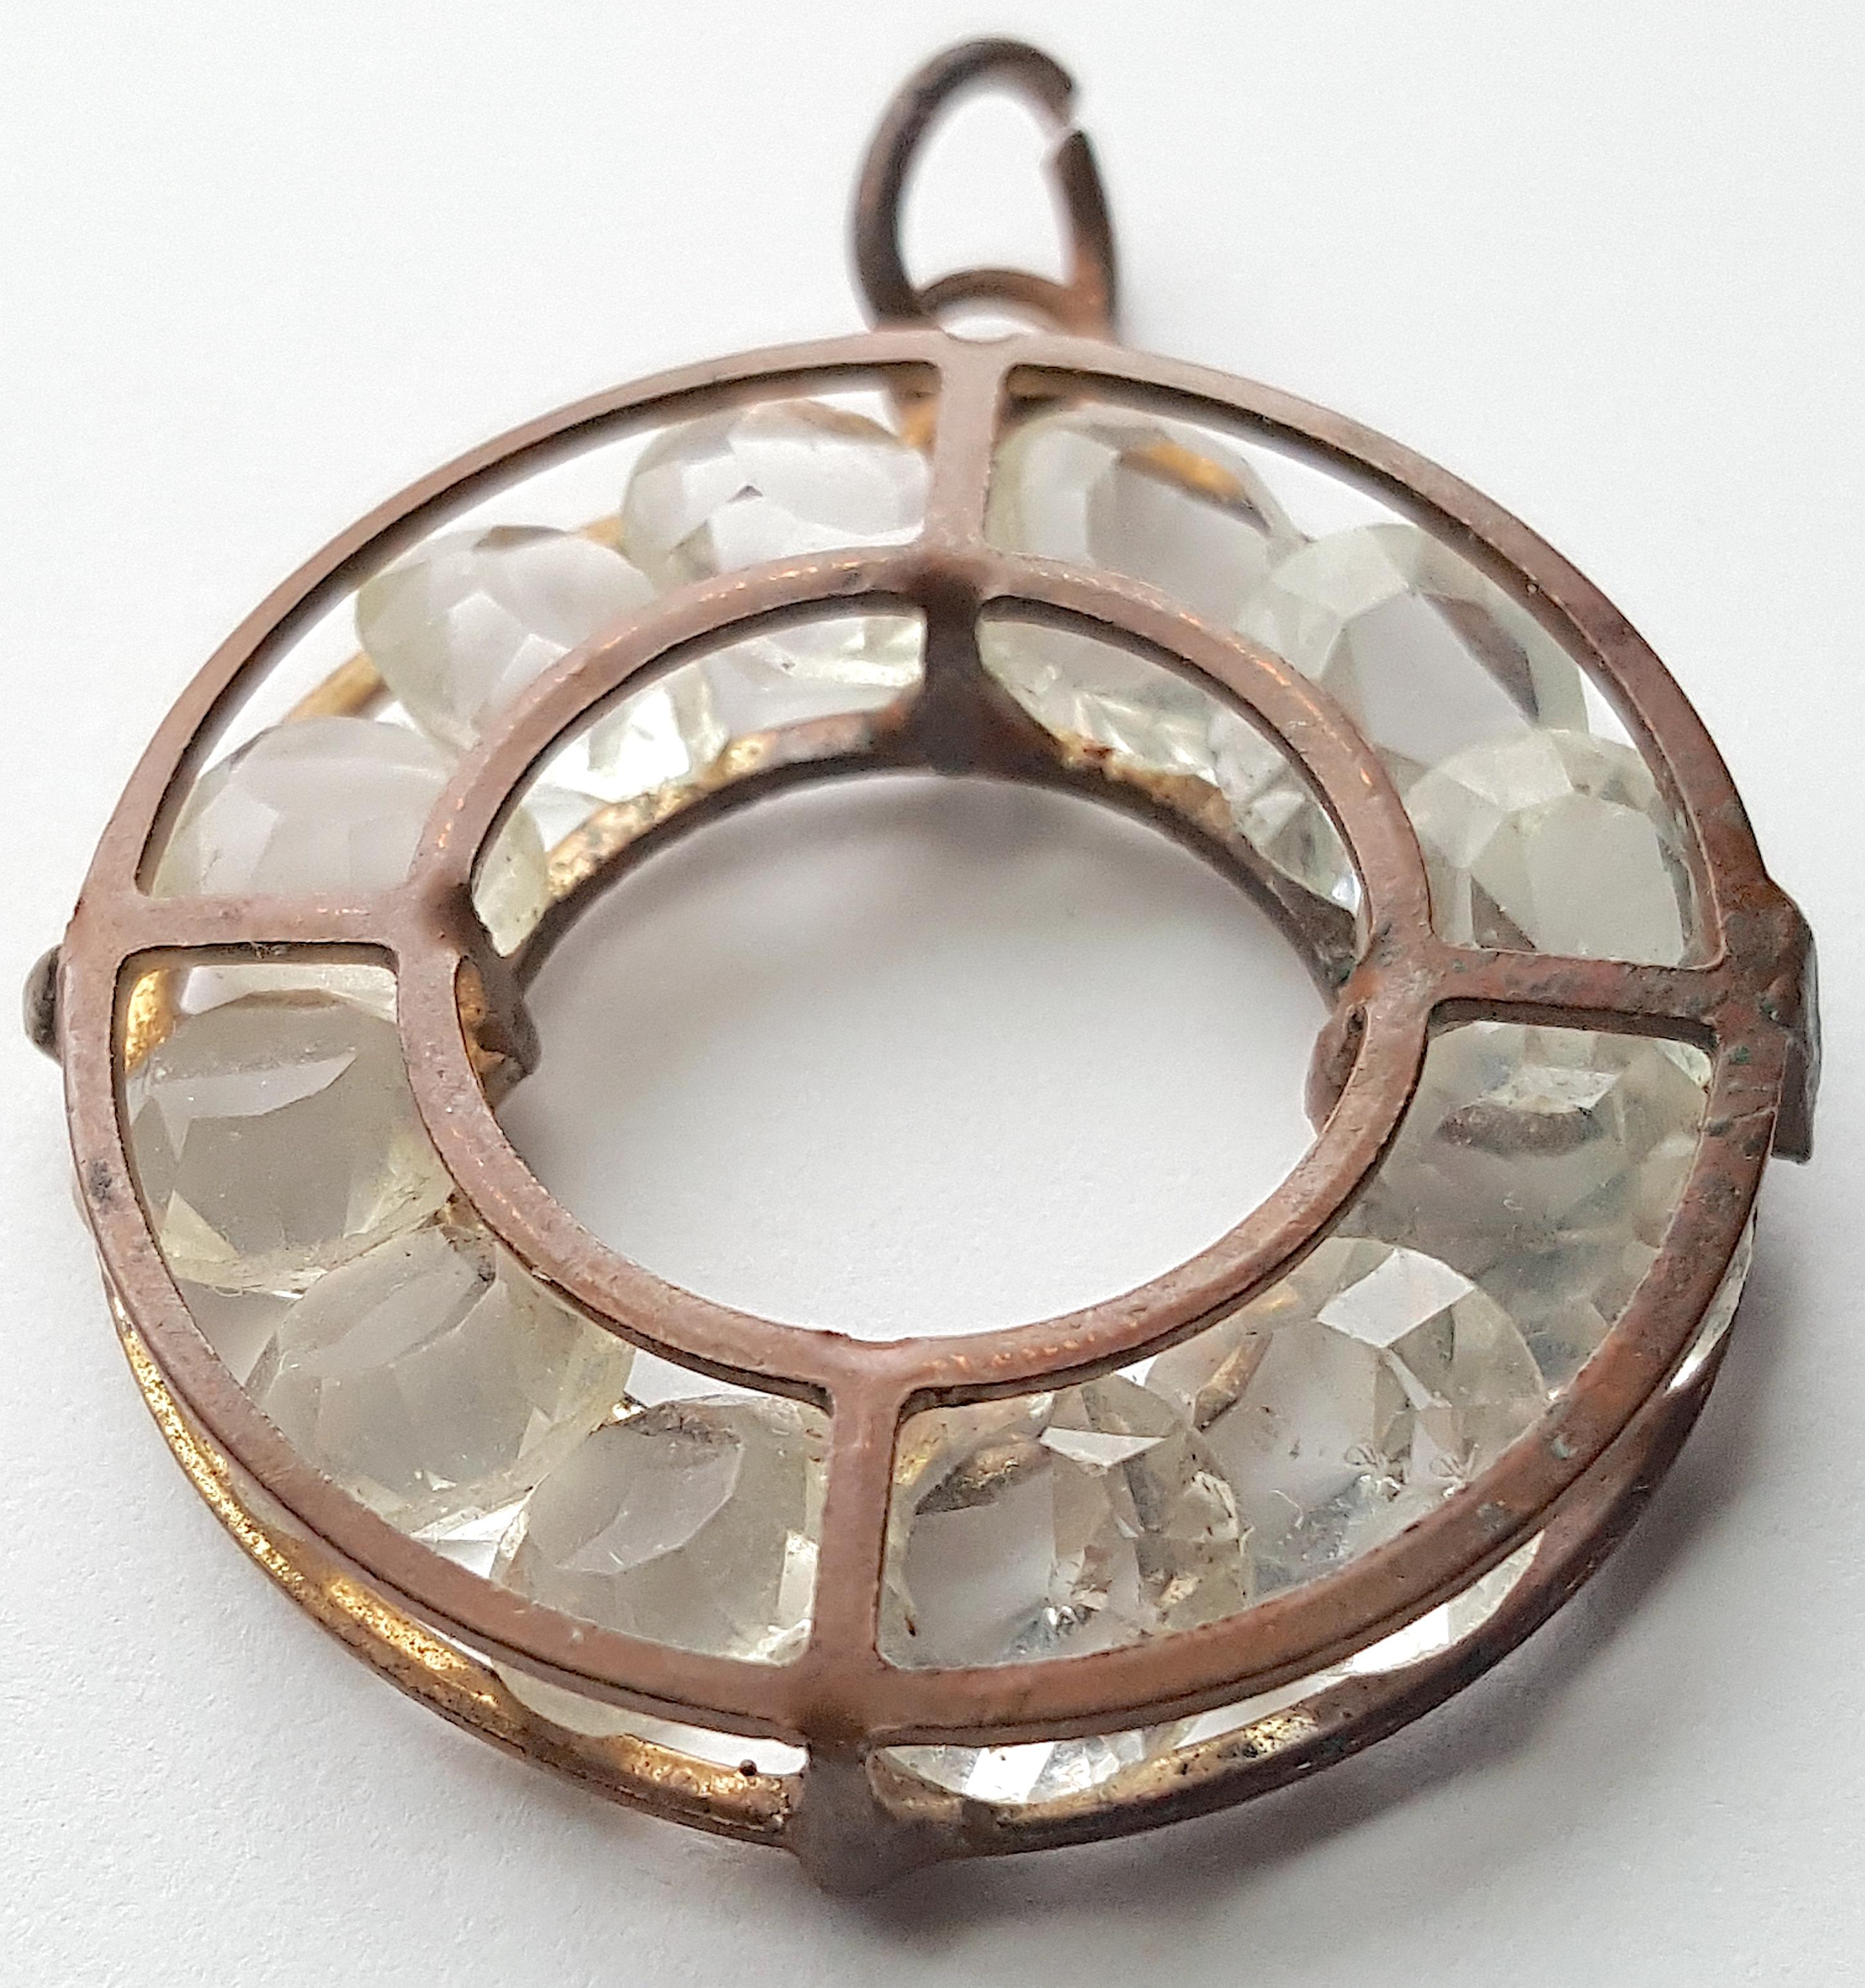 This antique amuletic bronze framed pendant cages a dozen 7mm-diameter single-cut rock crystals that each feature a table-cut decagon crown, deep pavilion, 21 facets and uncut girdle, while the culets range from off-center to blunted. They are